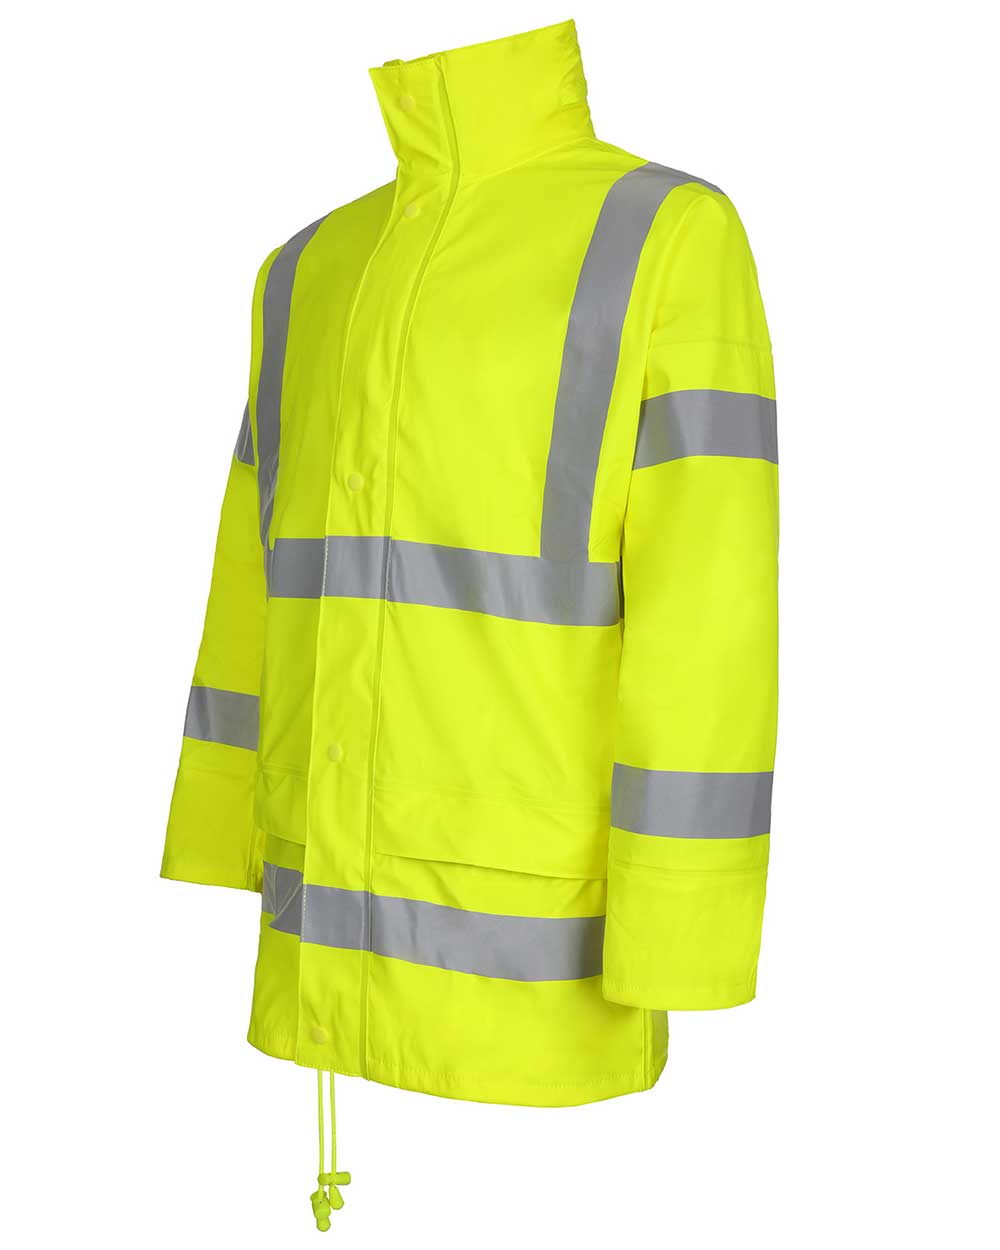 Side view Fort Air Reflex Waterproof Hi-vis Jacket in yellow with reflective strips